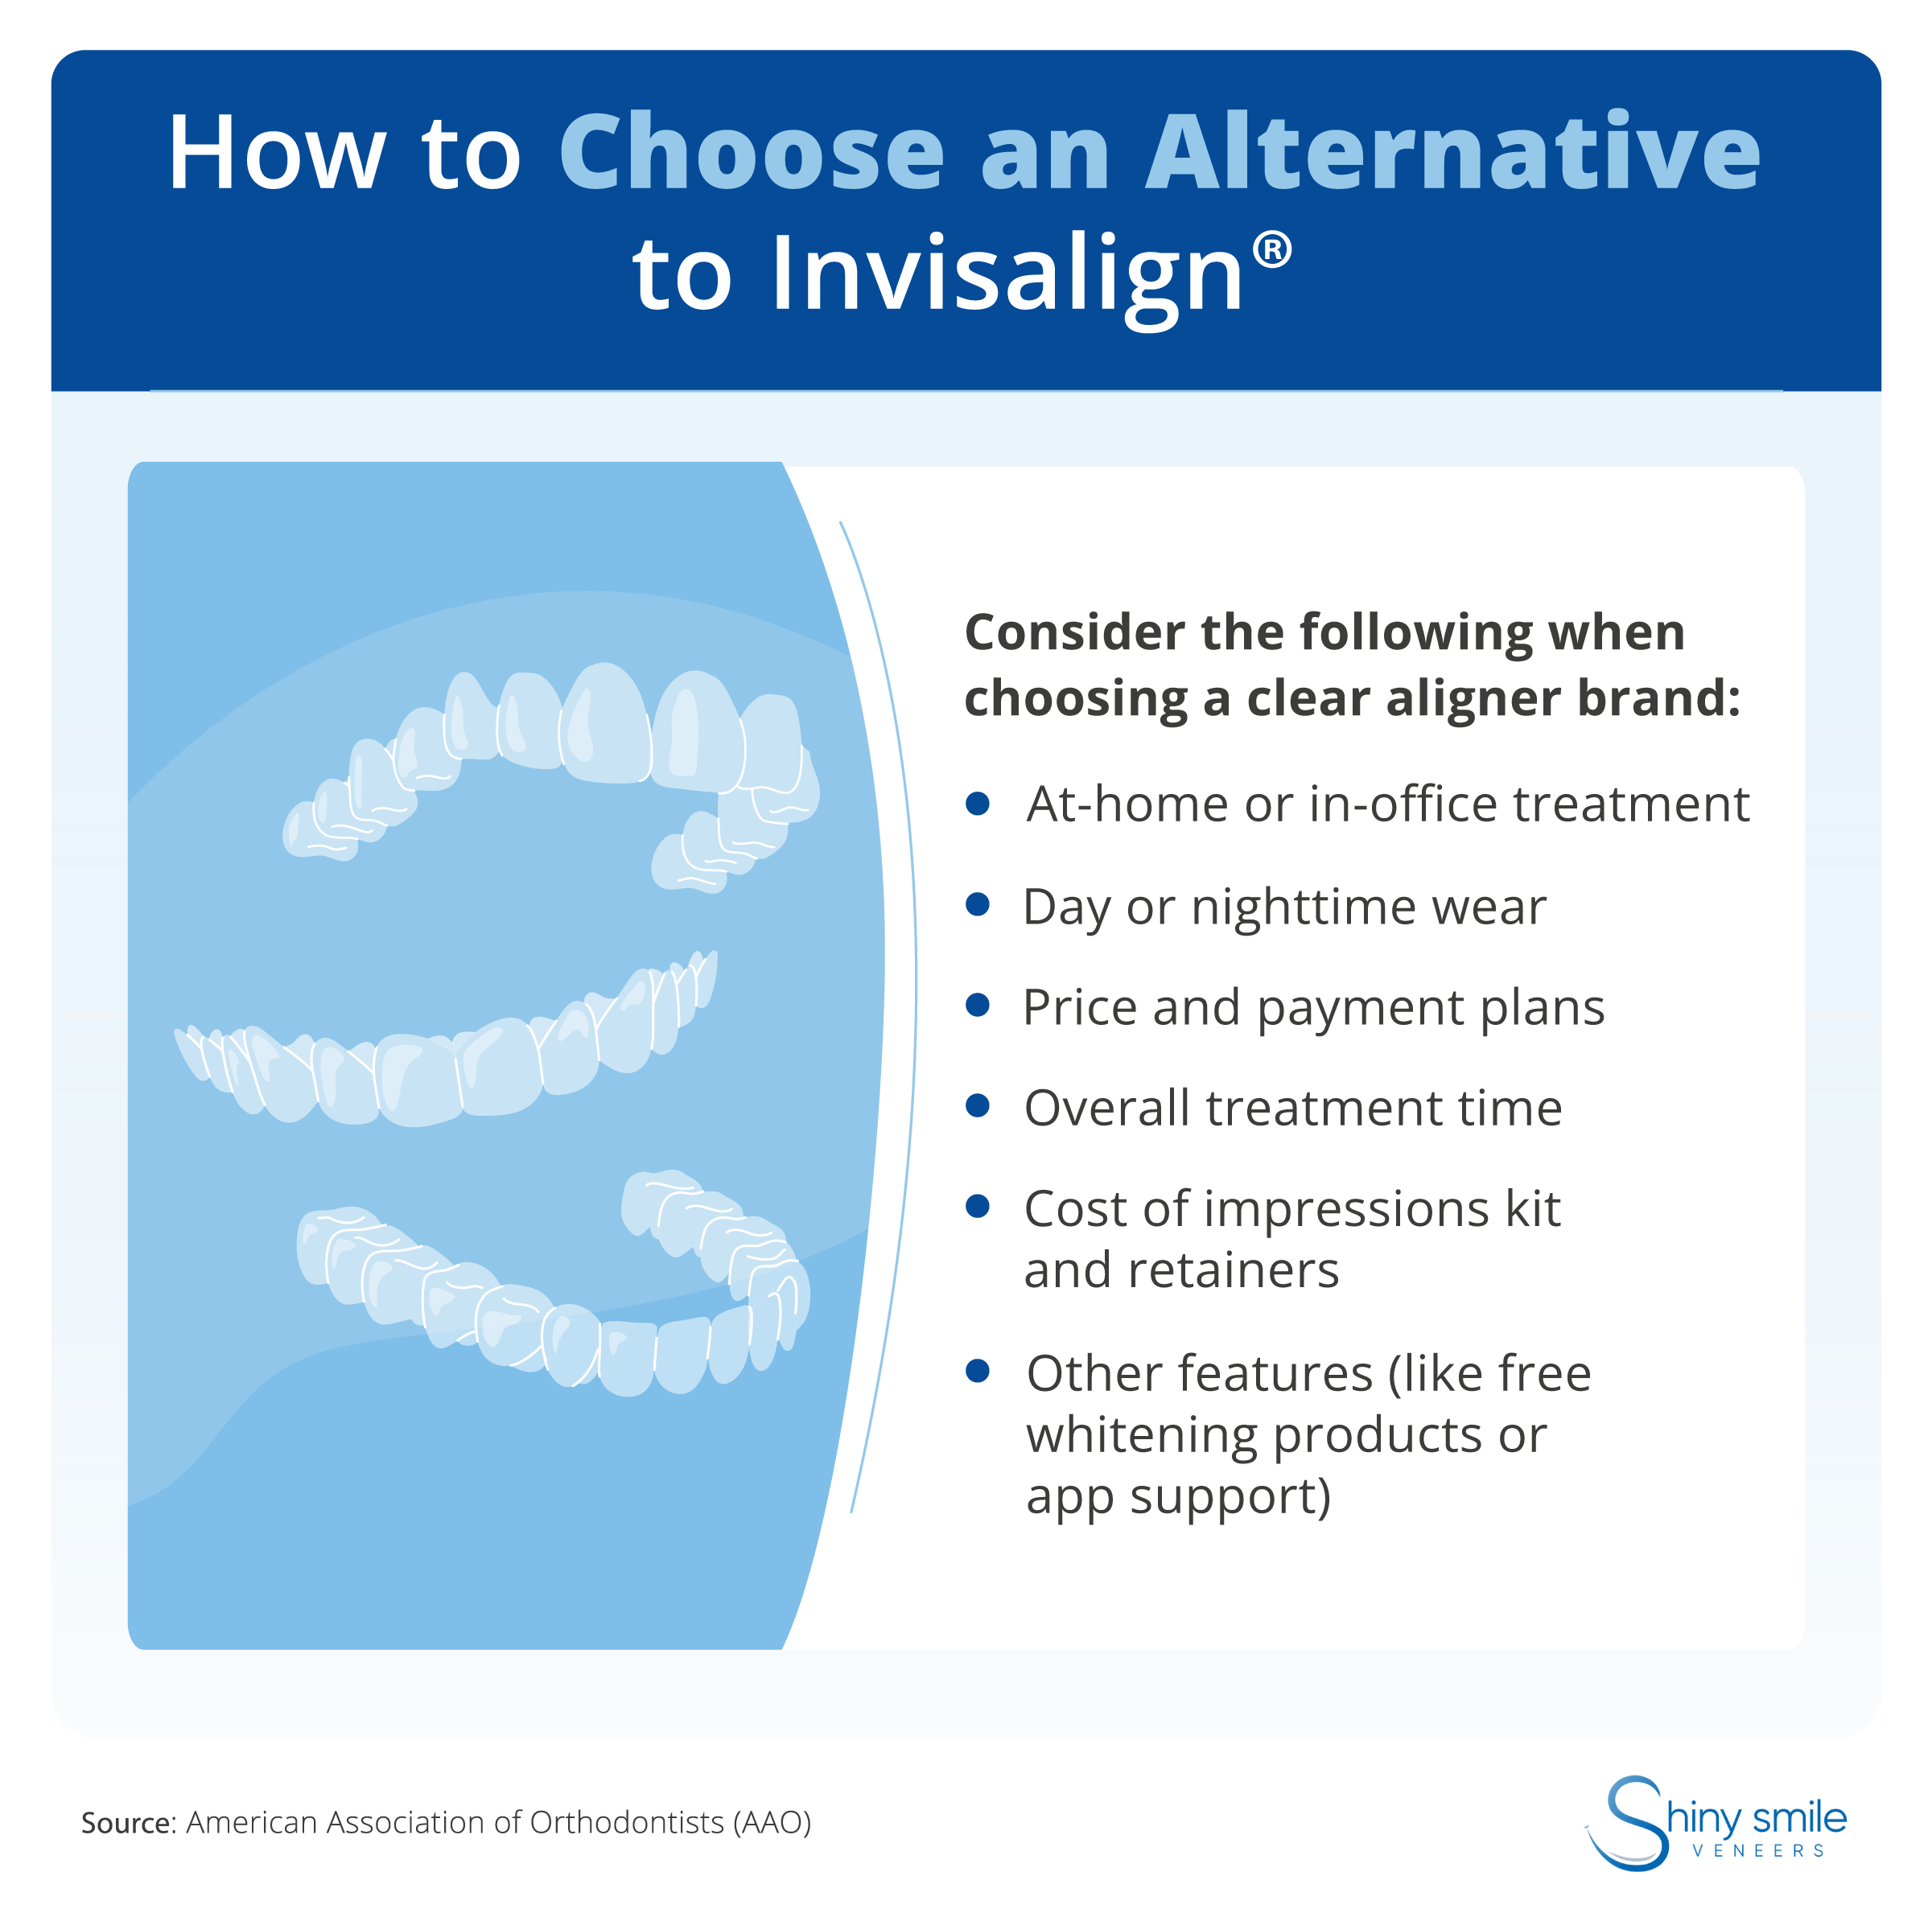 How to choose from the brands that compete with Invisalign